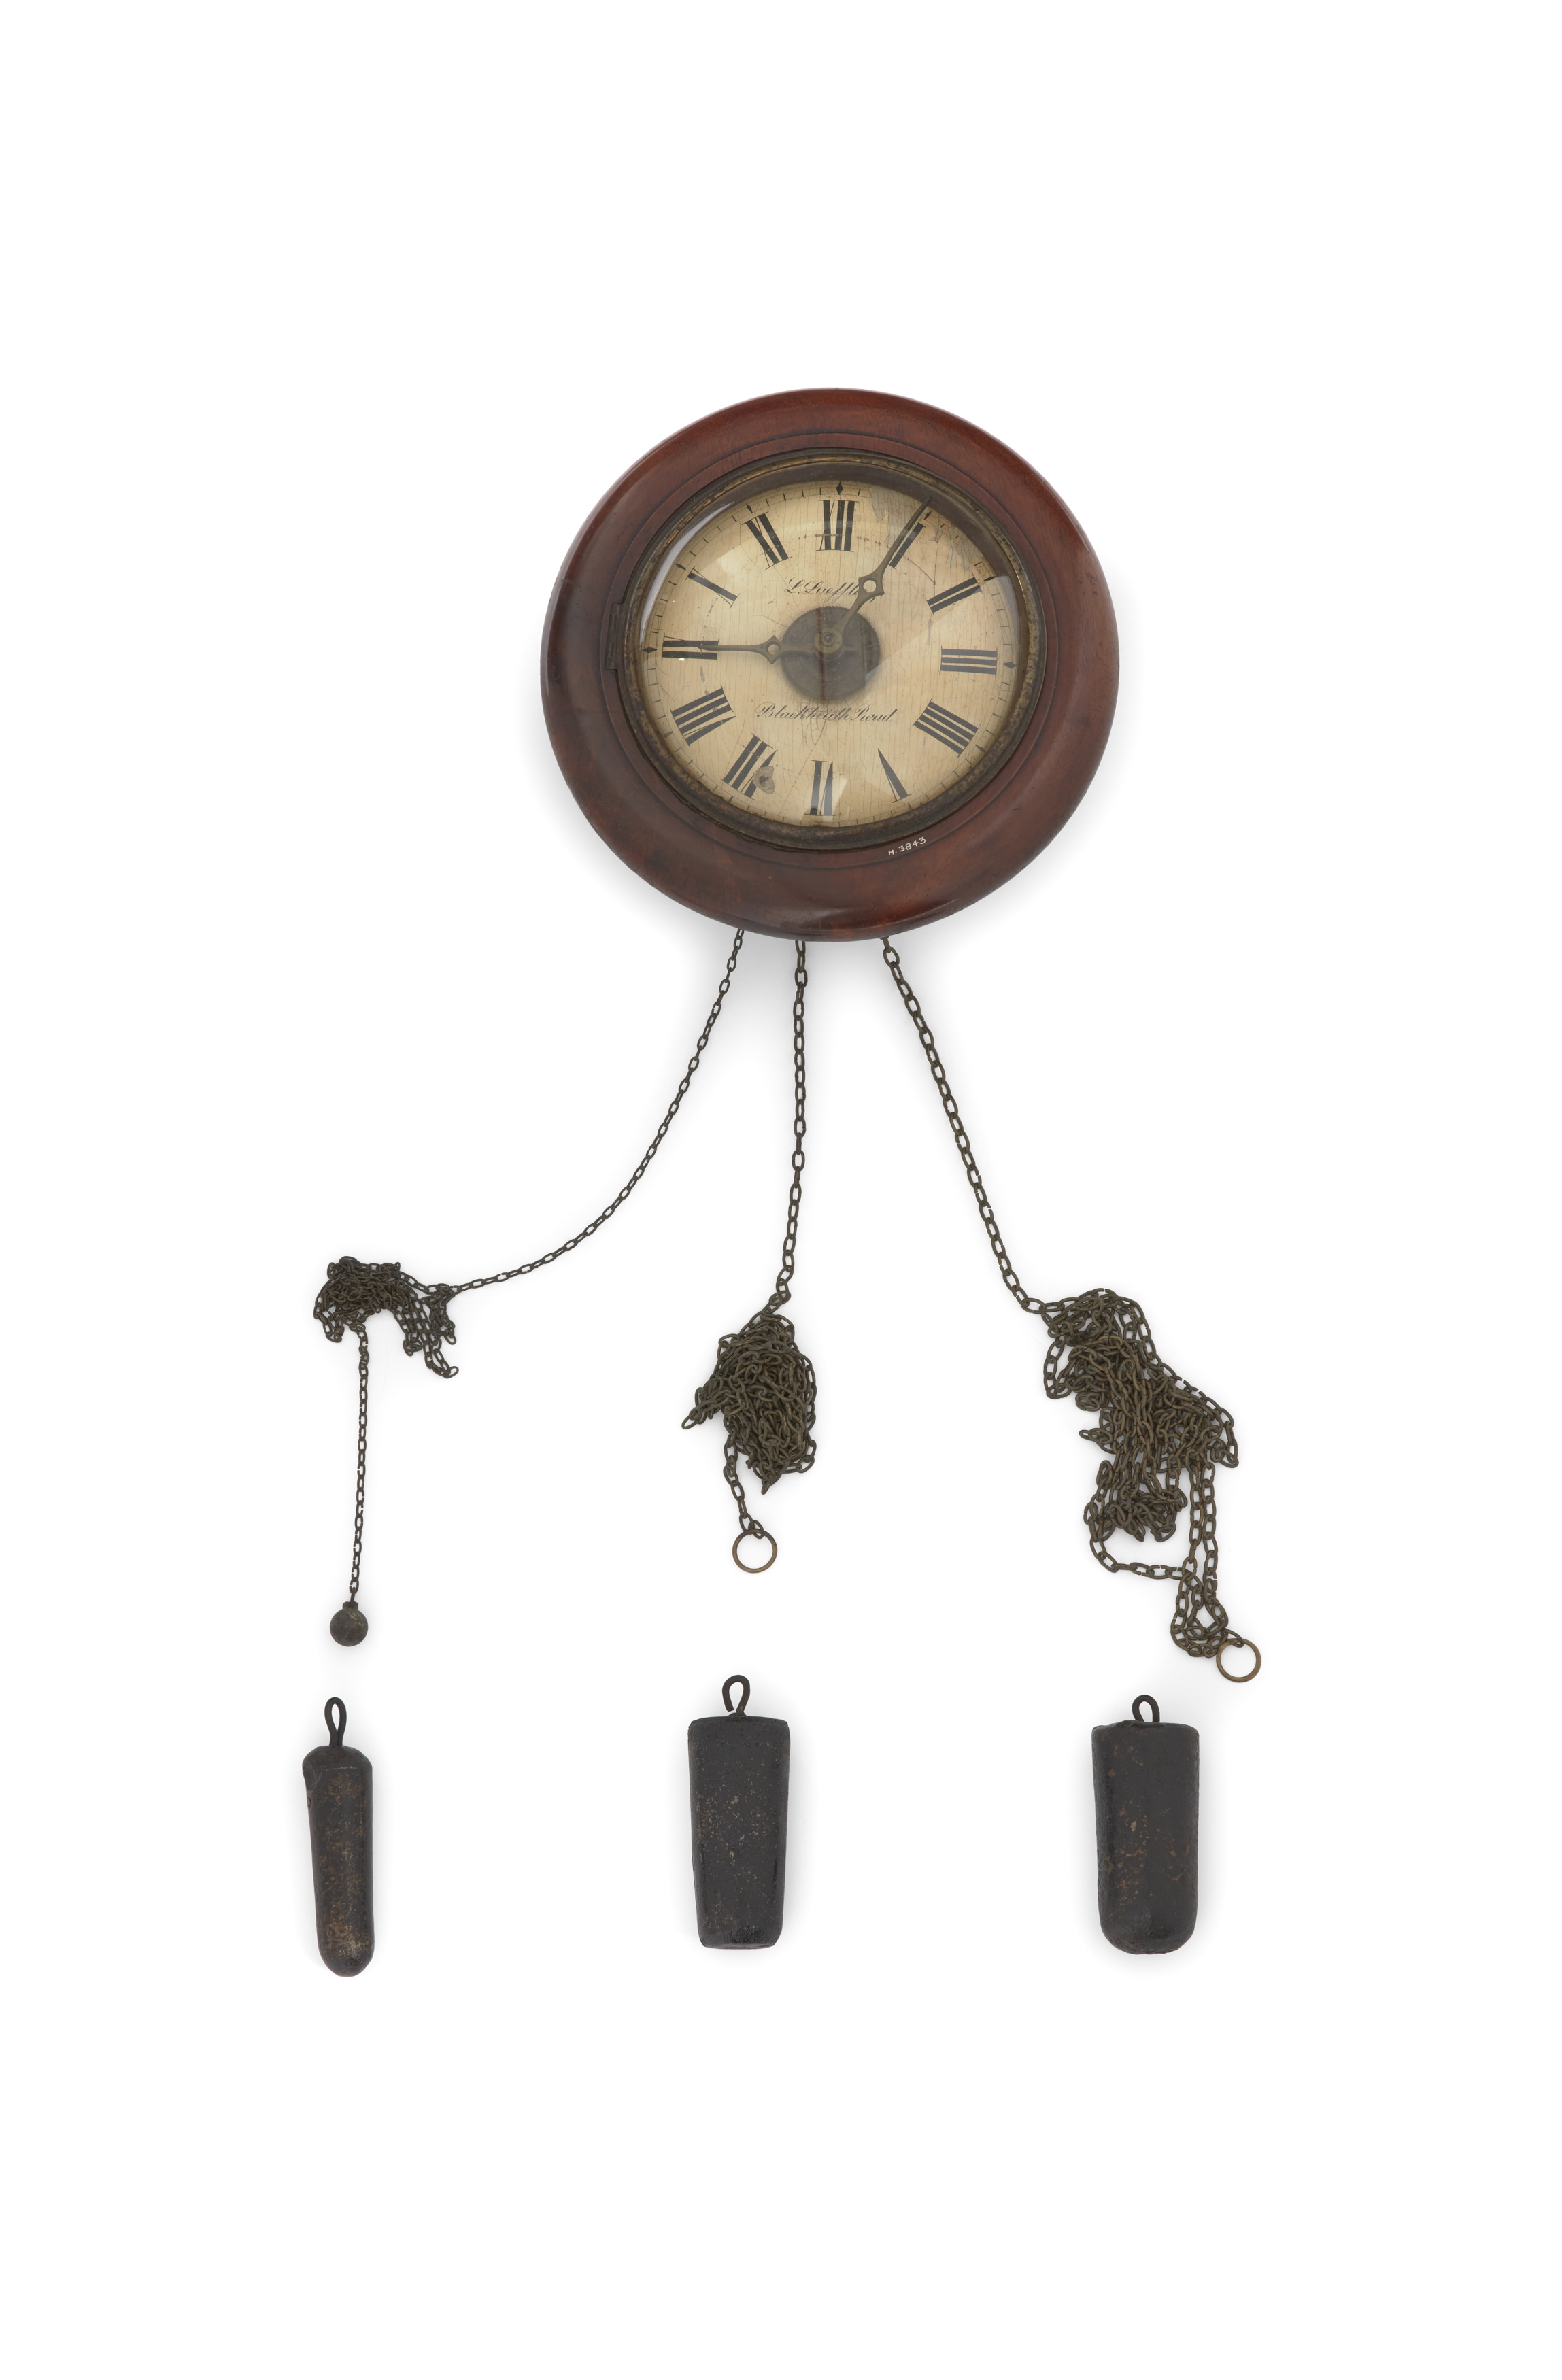 Wall clock and weights made by L Loeffier & Blackheath Read